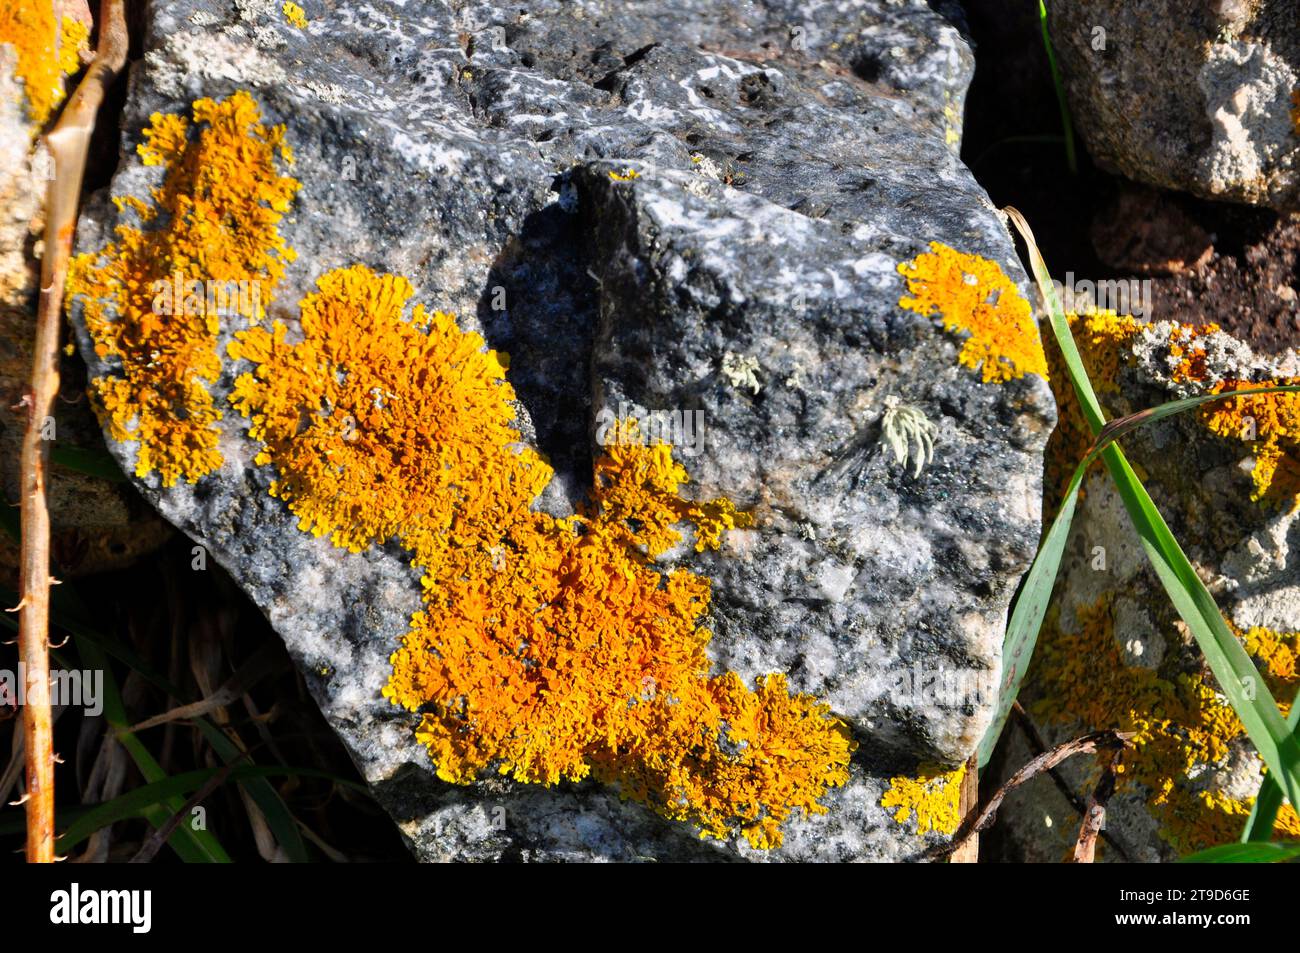 Bright orange lichen contrasts with the grey and white of the granite rock.Photo taken on a bright summers day on the Southwest Coast path near Lands Stock Photo